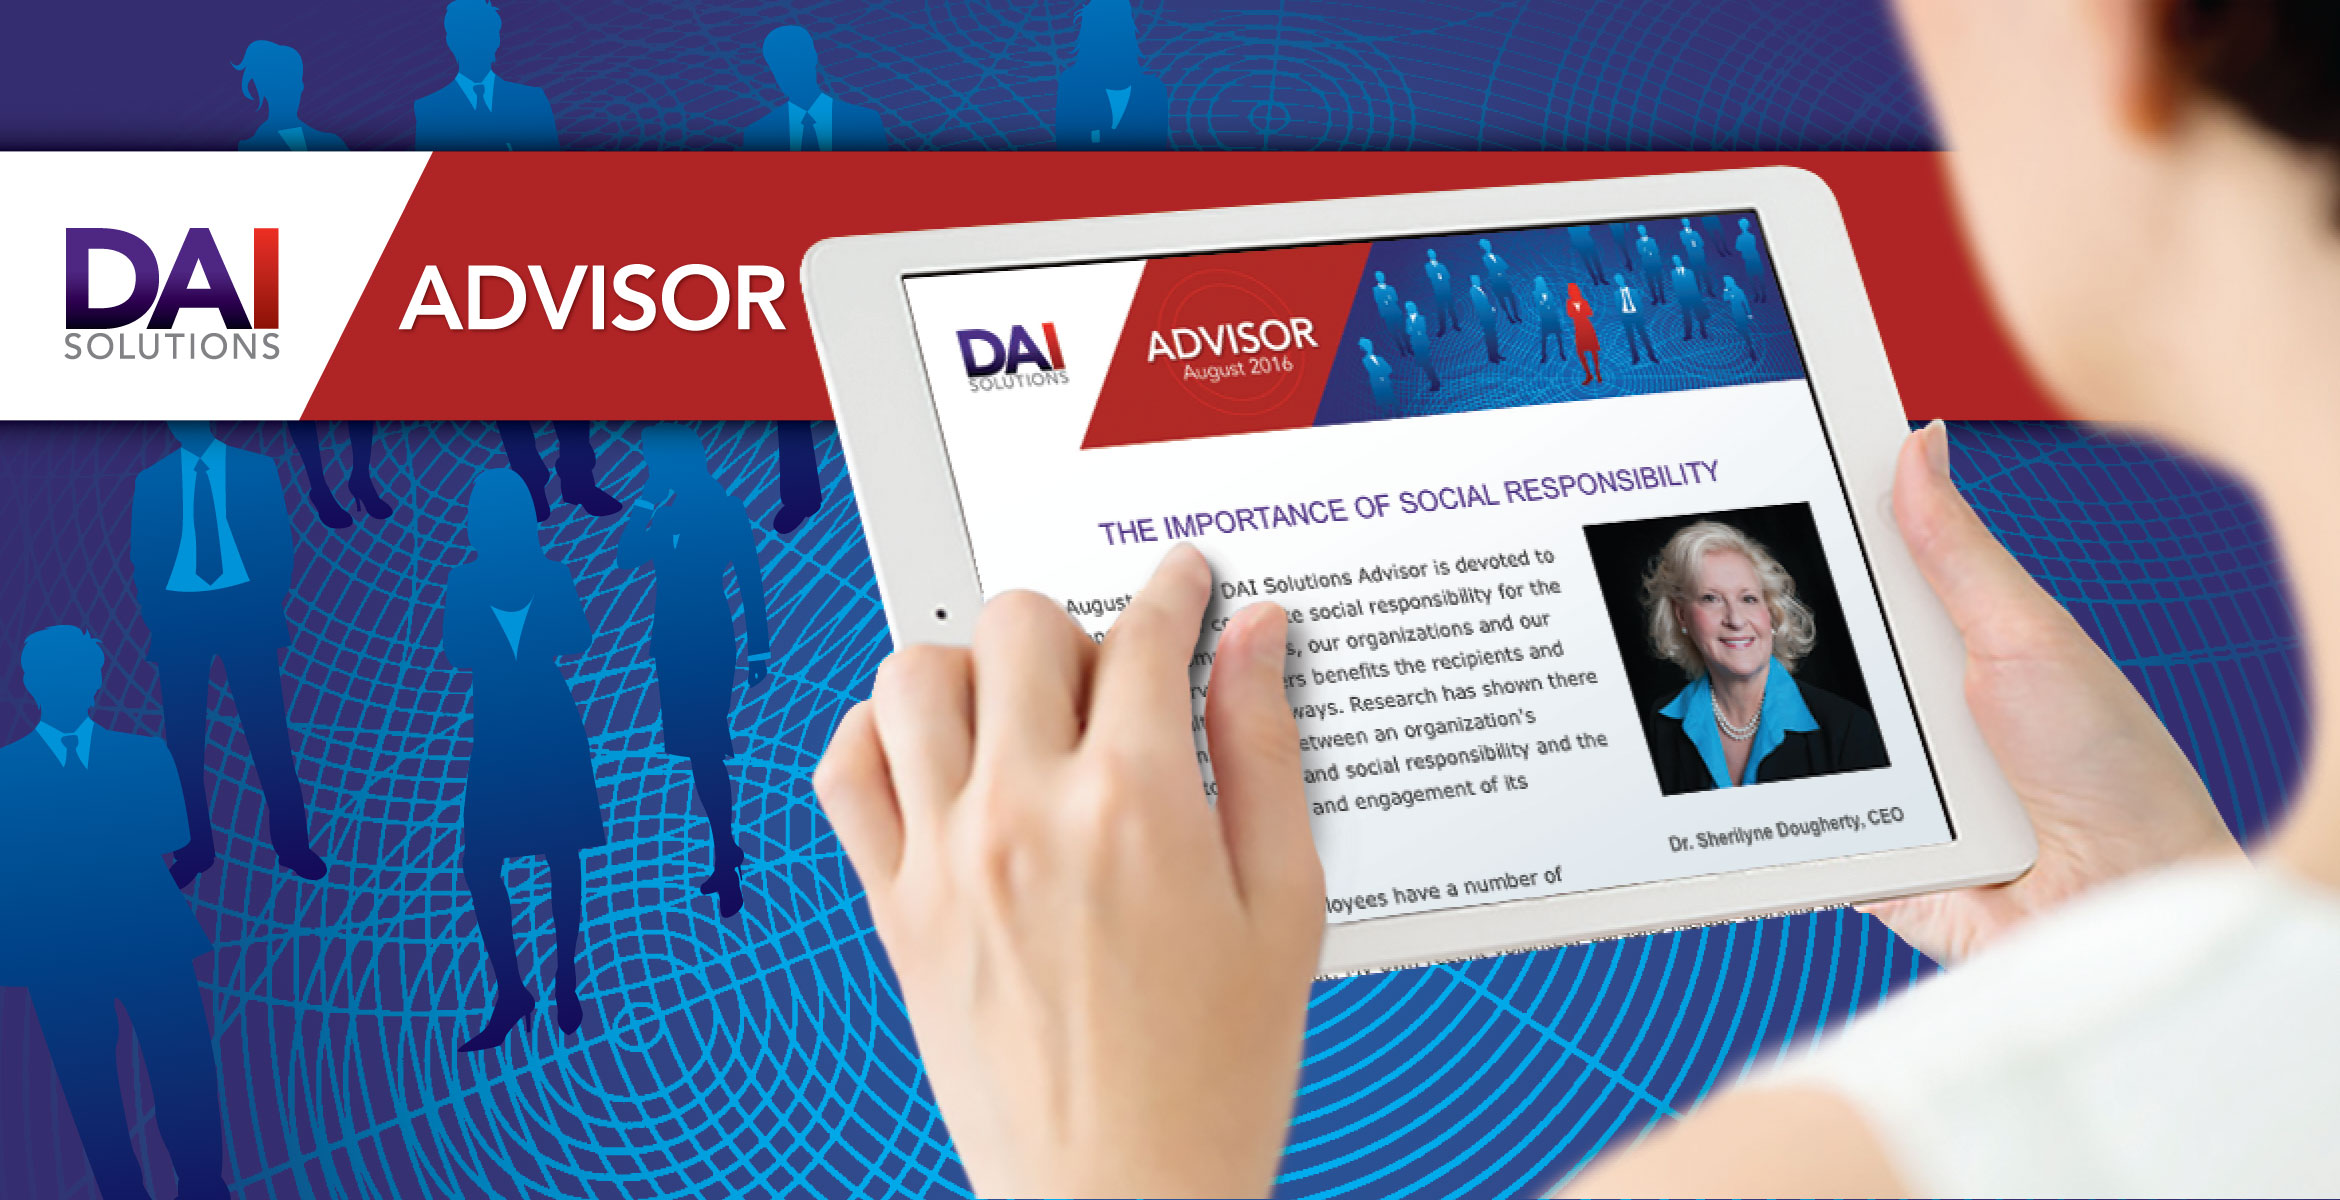 DAI Advisor header plus picture of the newsletter on a tablet computer